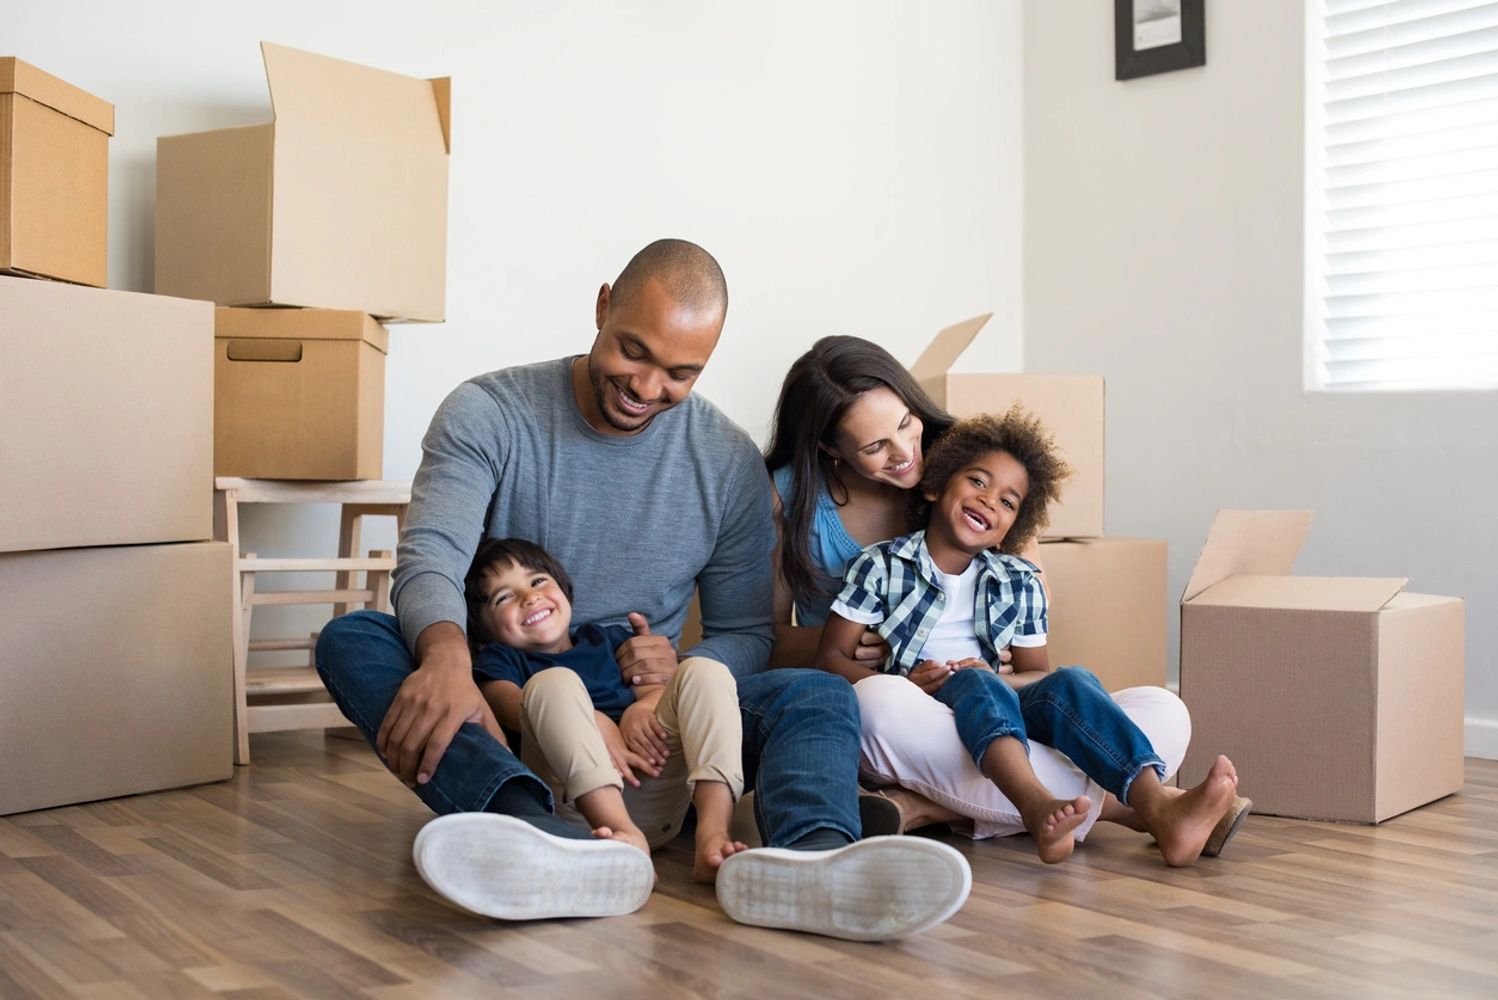 Professional Moving Service in Moncton - Trusted Movers for a Stress-Free Move